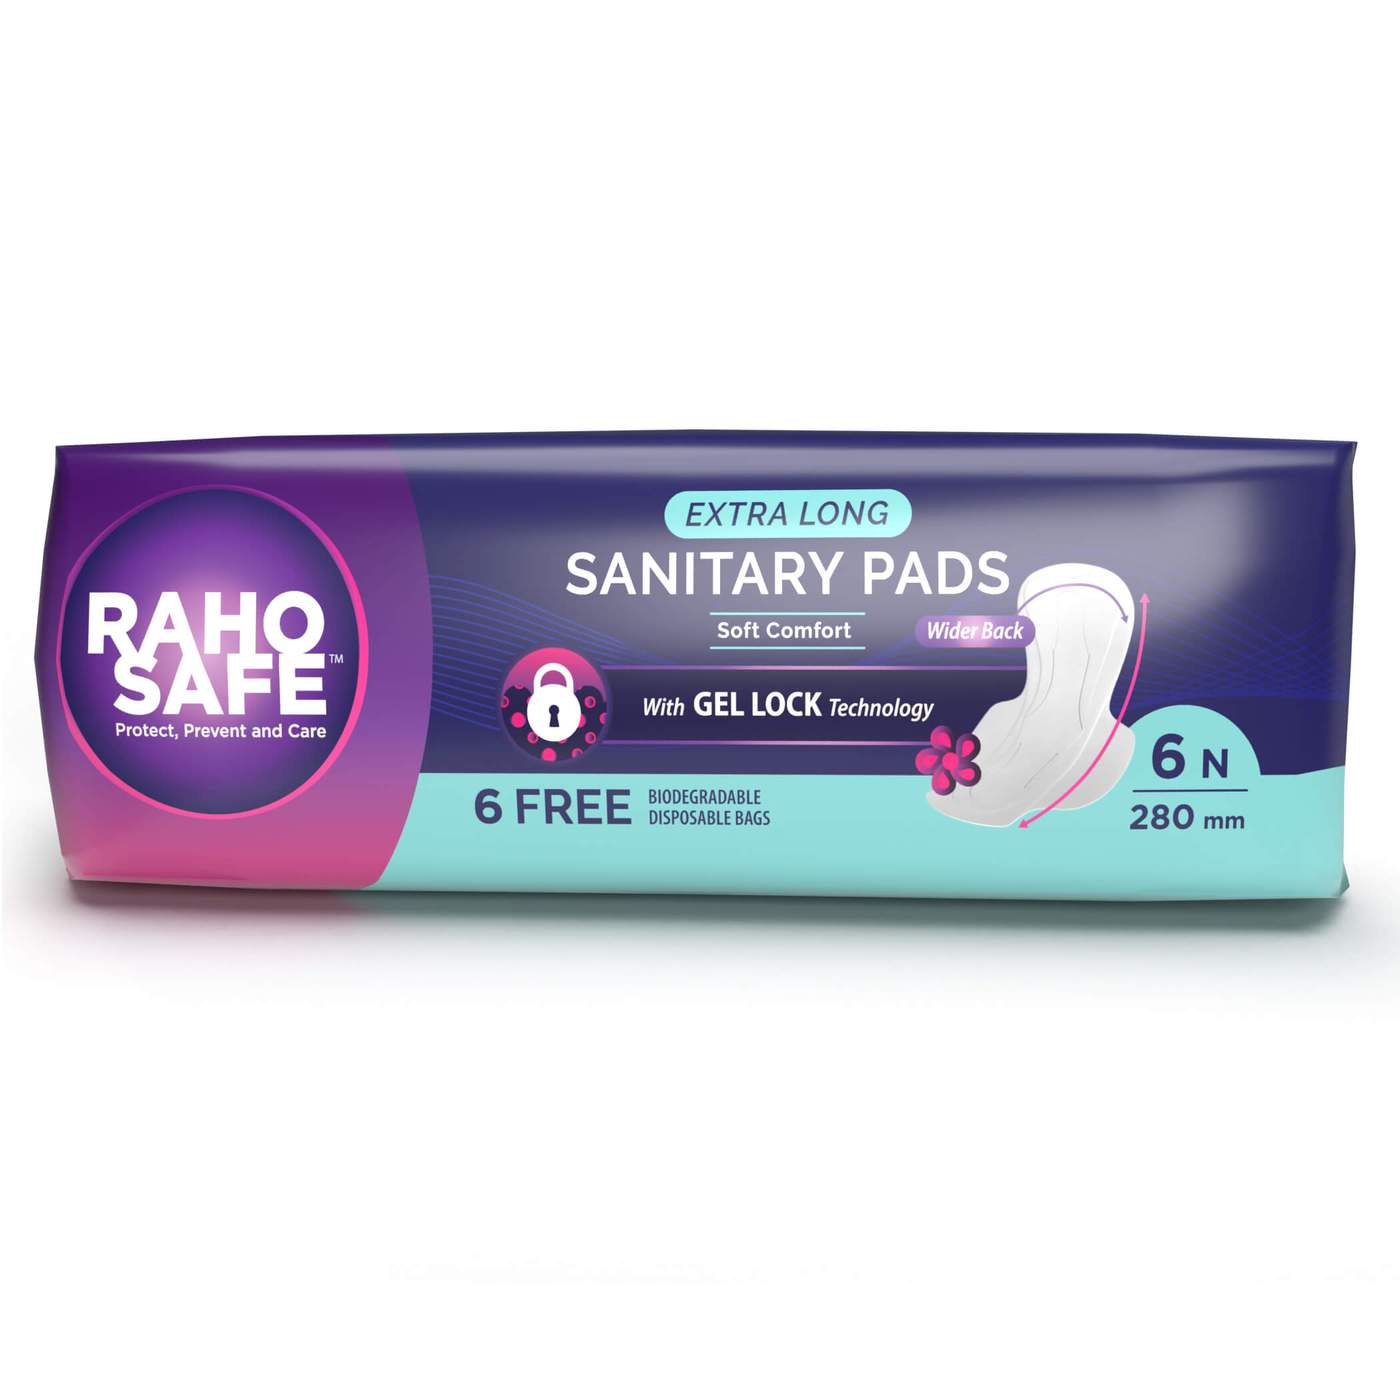 Raho Safe Sanitary Pad Extra Long With Biodegradable Disposable Bags (pack Of 6) 